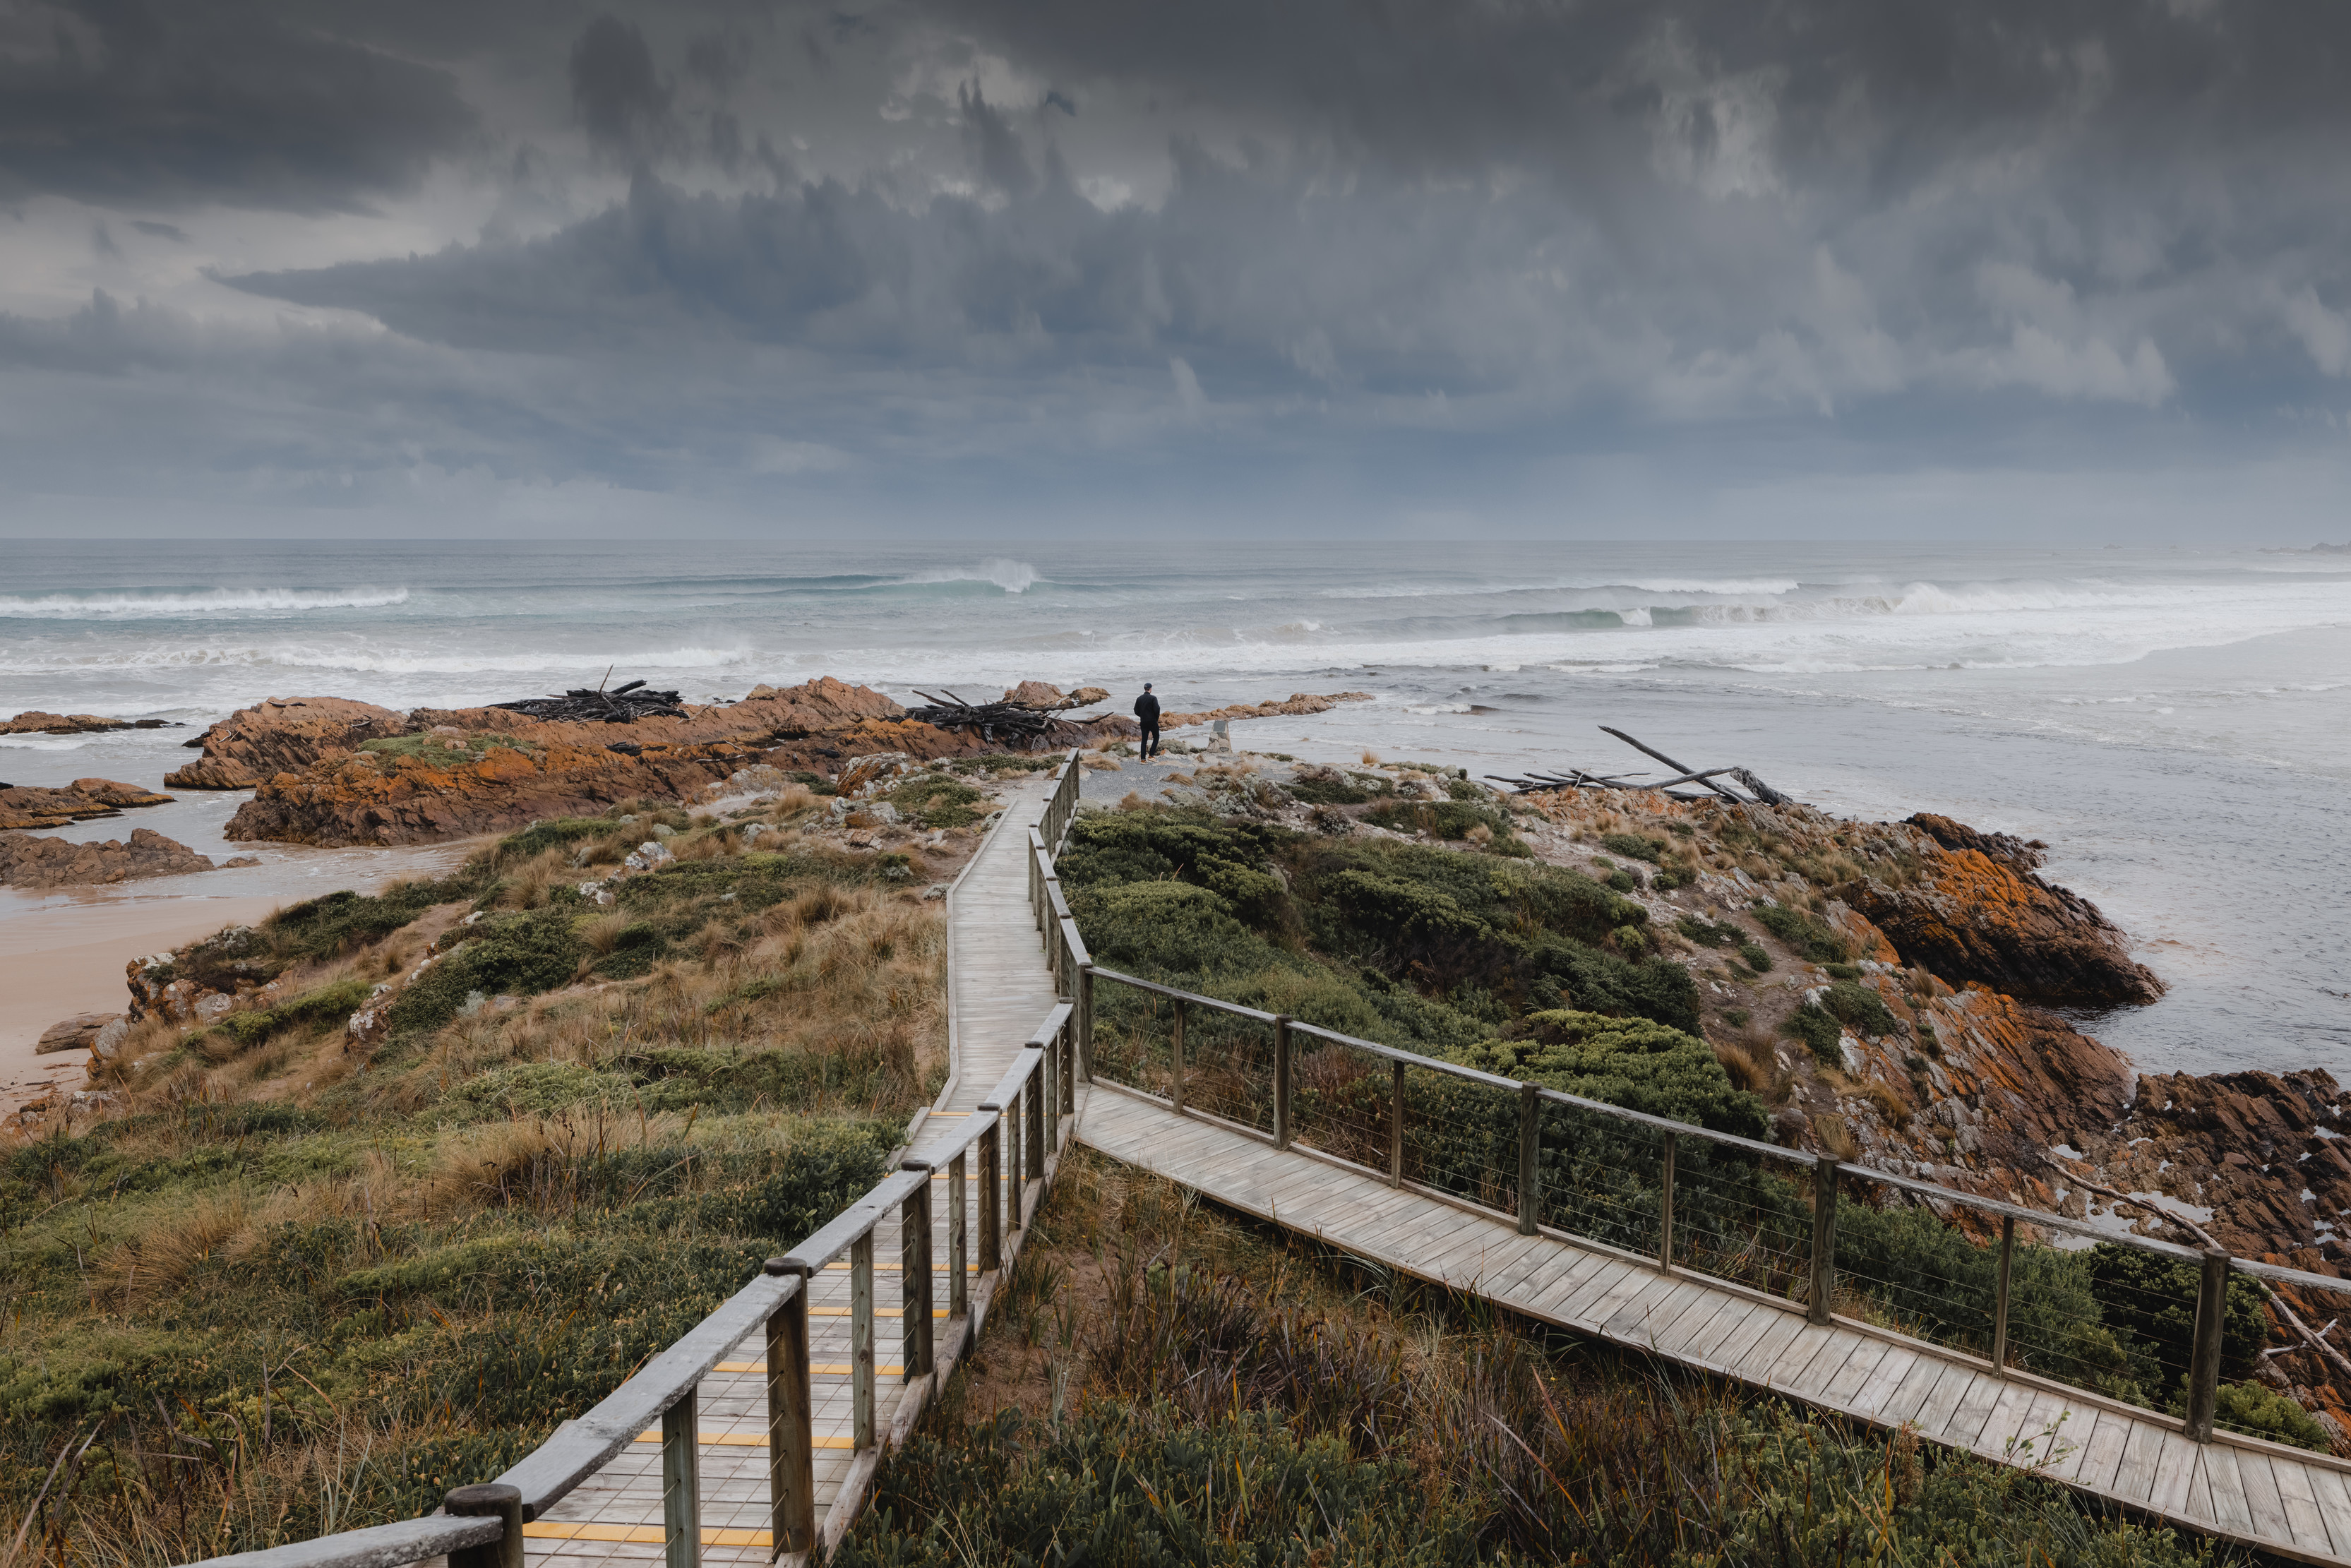 Image of Gardnier Point with wooden boardwalks surrounded by bush and rocks lead to the point with the ocean in the background.